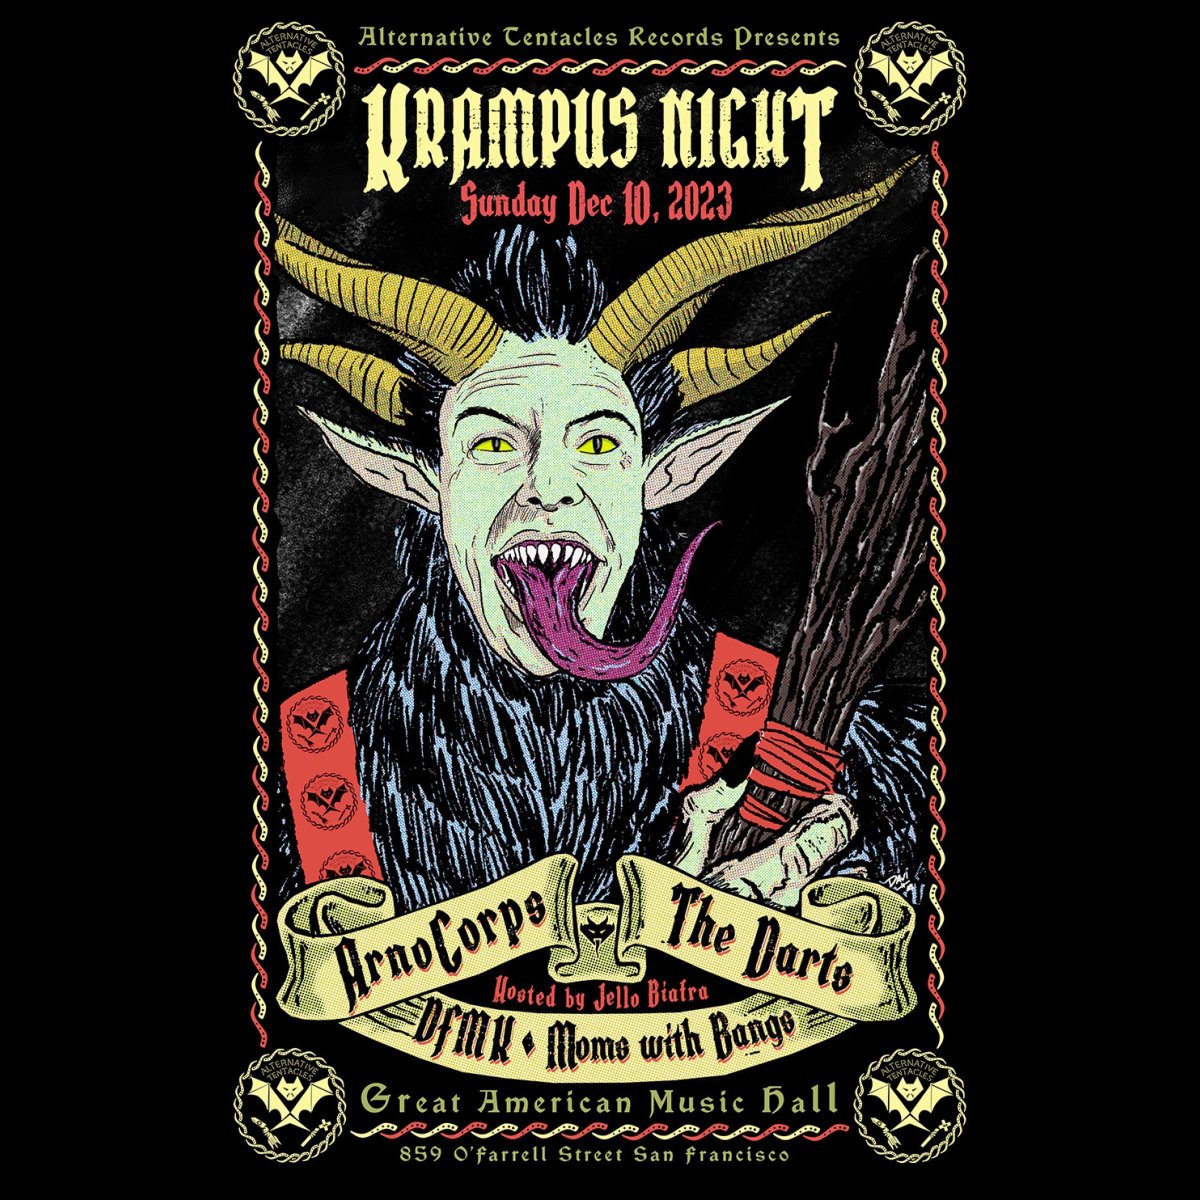 The Darts are playing Krampus Night! Catch them in San Francisco on Sunday, Dec. 10th at The Great American Music Hall with ArnoCorps, DFMK, and Moms With Bangs! Hosted by none other than Jello Biafra! Tickets on sale now at buff.ly/48YqWIe